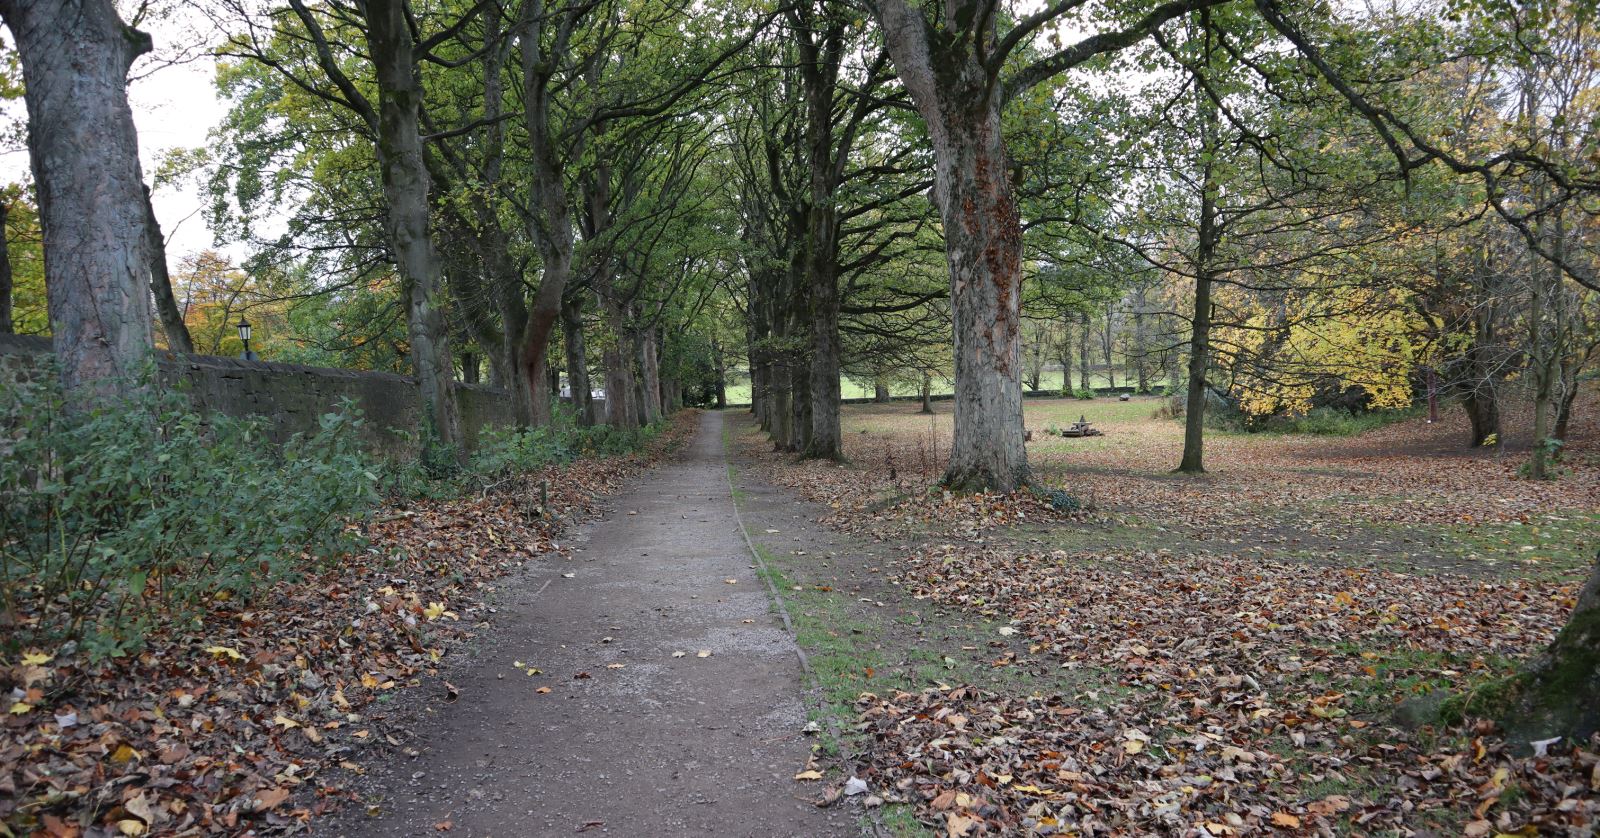 view of the path throughout The Bowes Museum ground and woodlands